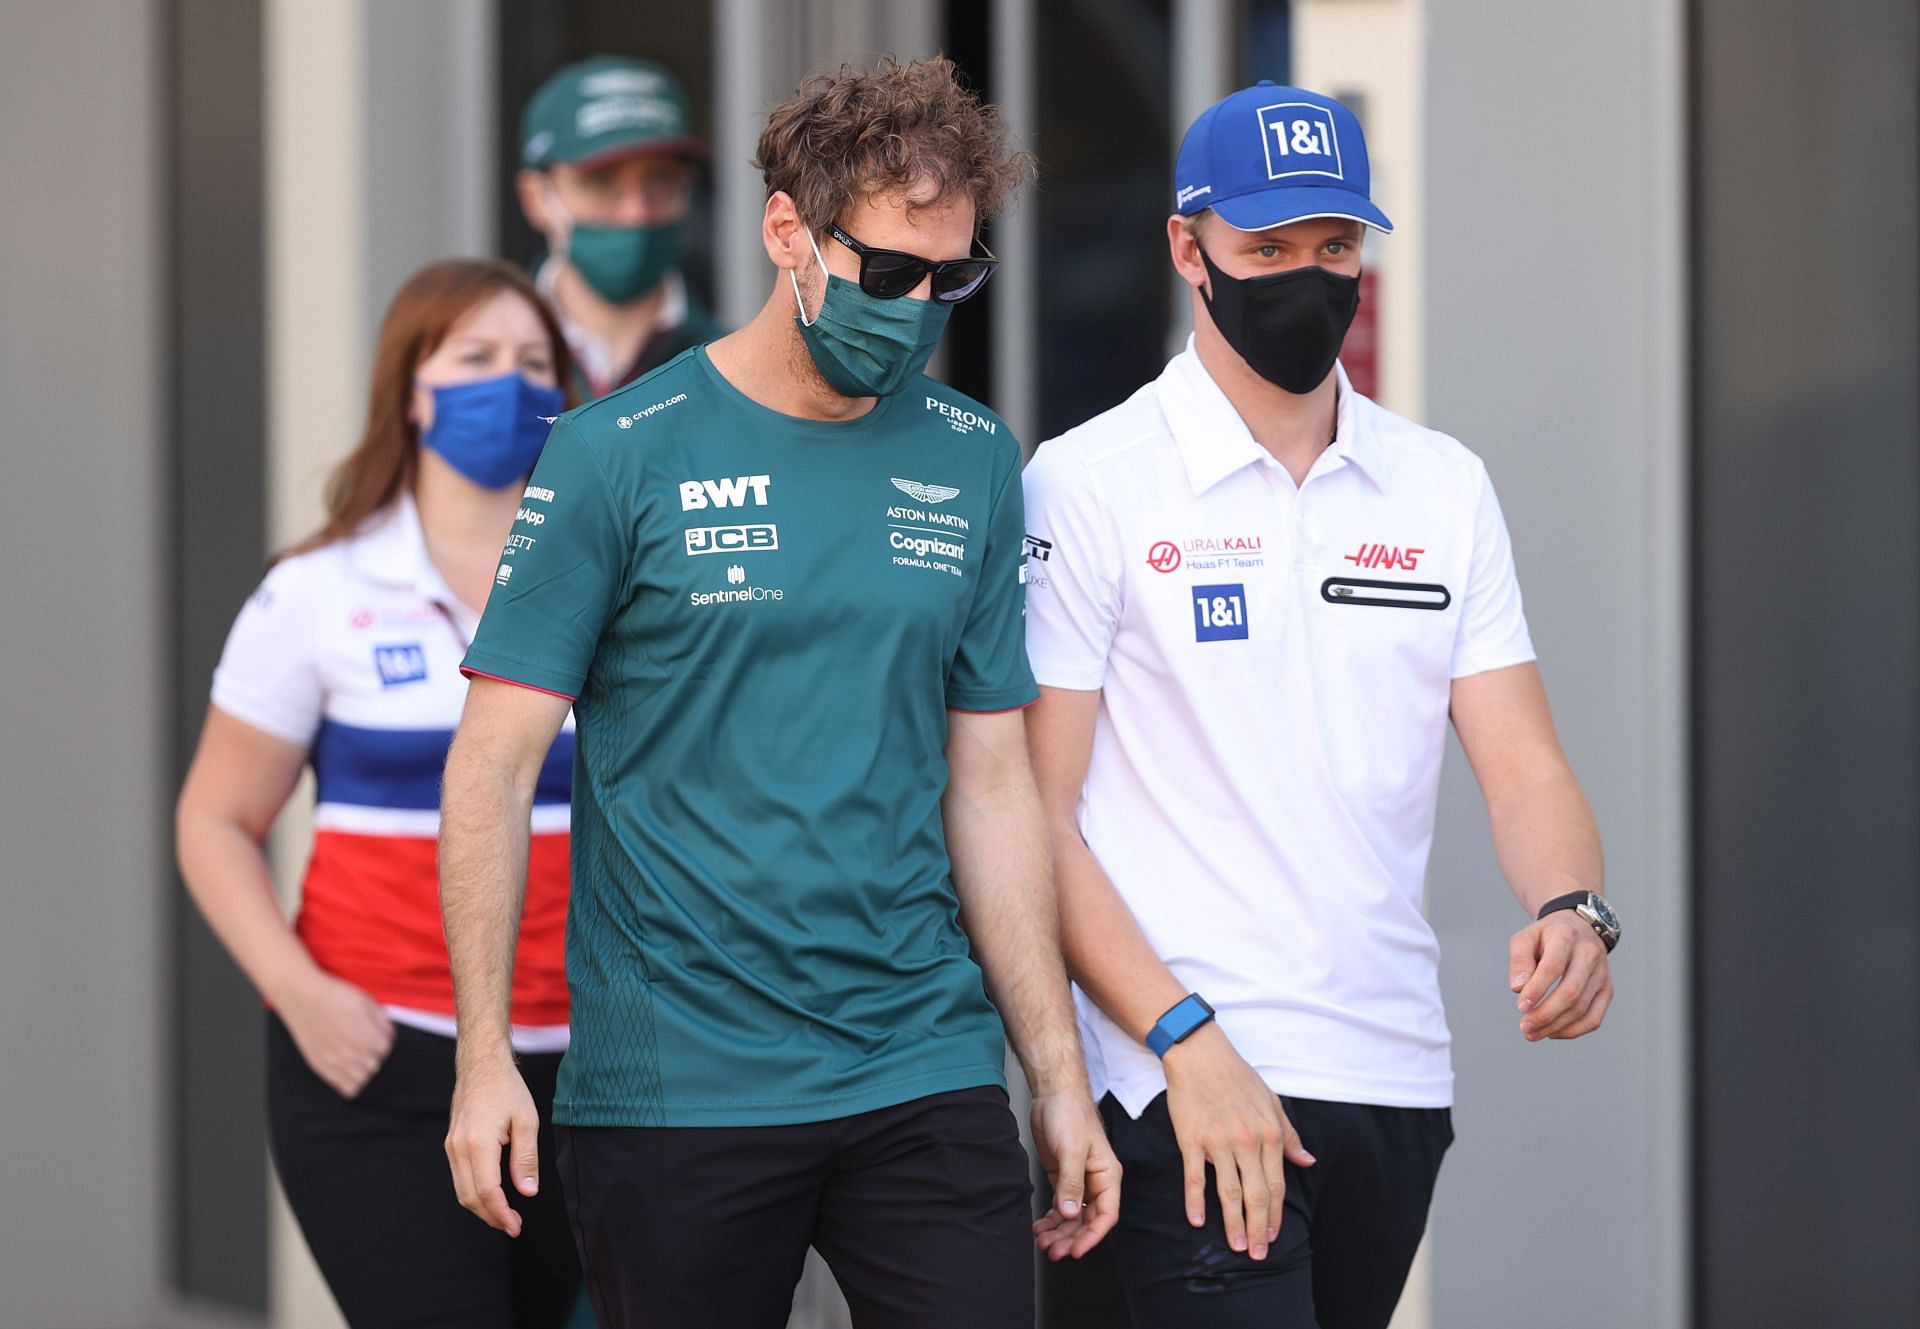 Aston Martin driver Sebastian Vettel (left) and Haas driver Mick Schumacher (right) walk in the paddock during the 2021 F1 Abu Dhabi GP weekend. (Photo by Lars Baron/Getty Images)